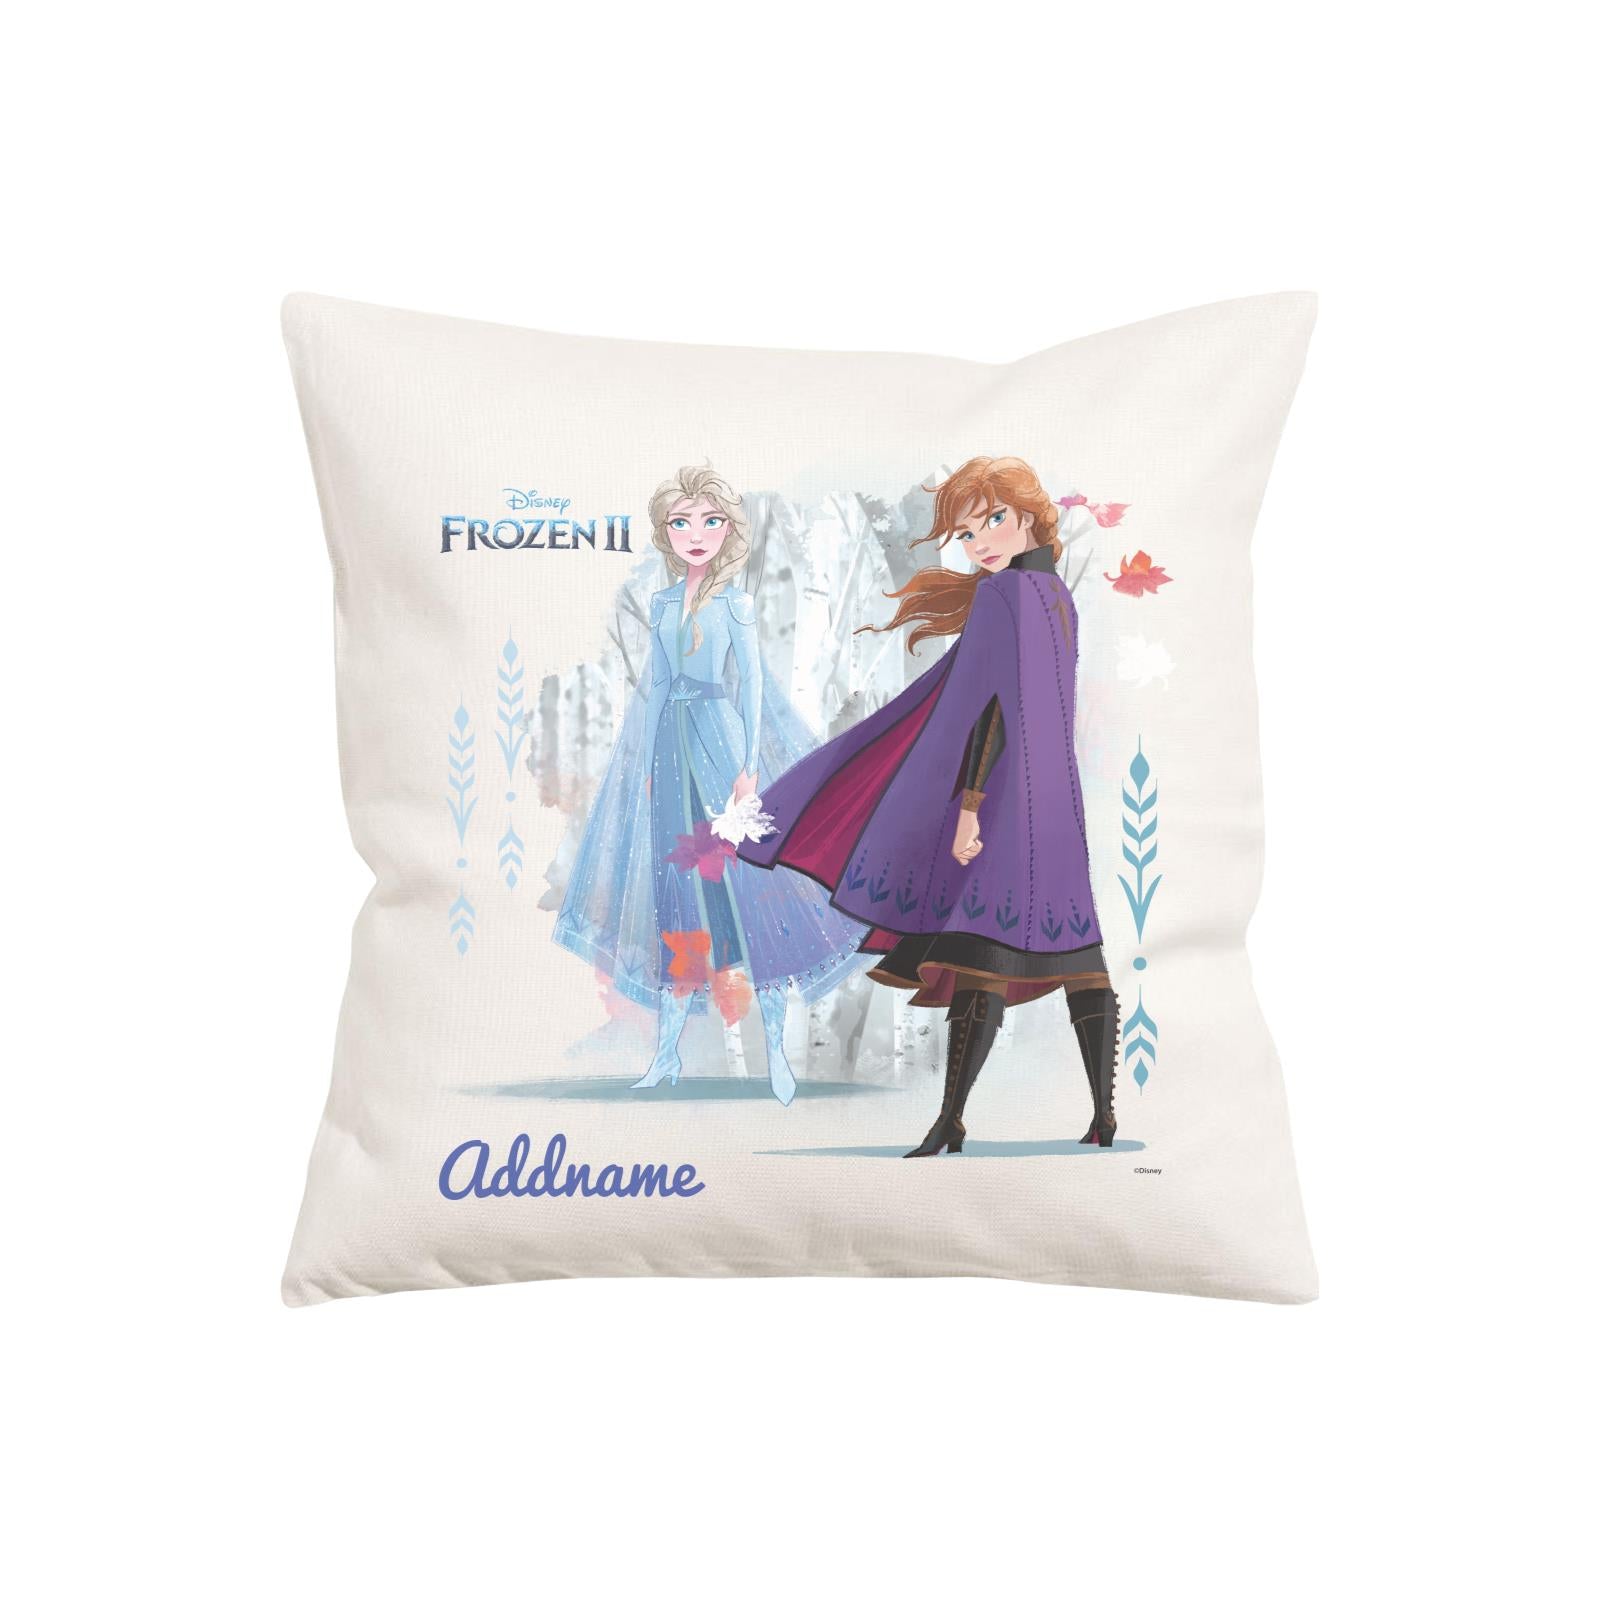 Disney Frozen 2 Forest Spirit Personalised Anna and Elsa Front Pillow Cushion